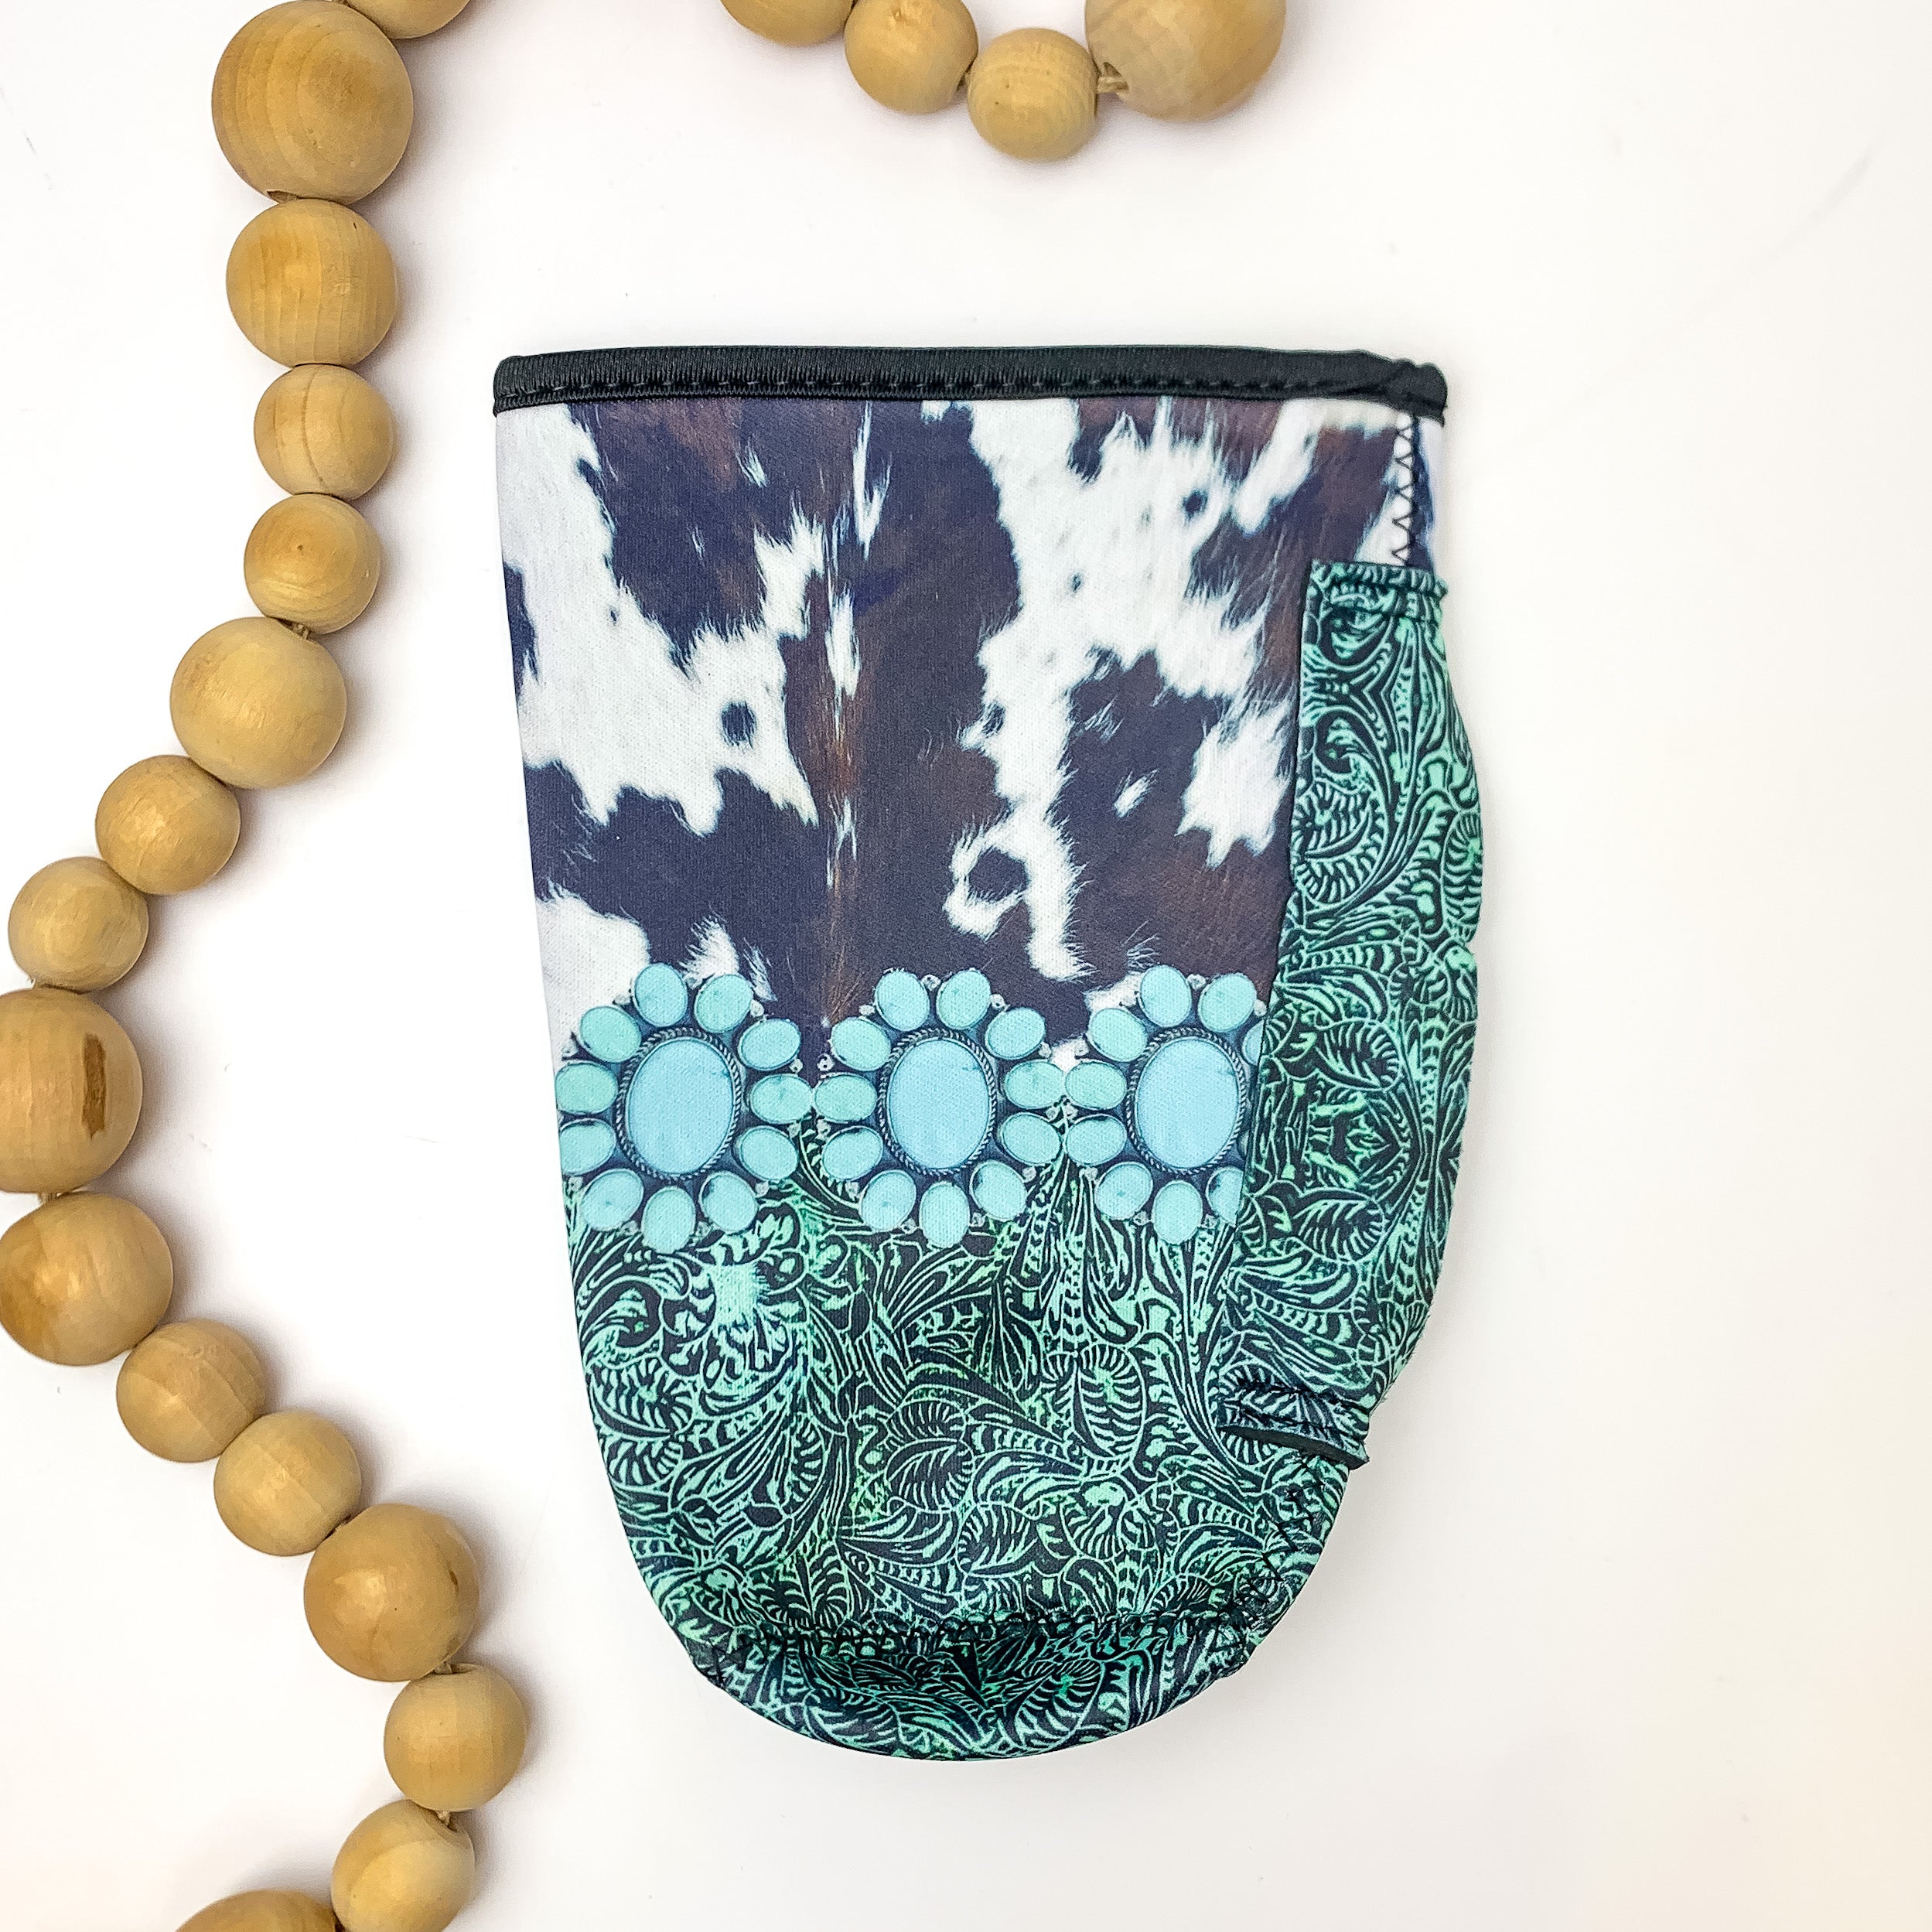 Cow Print Tumbler Drink Sleeve With Turquoise Designs. Pictured on a white background with wood beads to the left of the koozie for design.